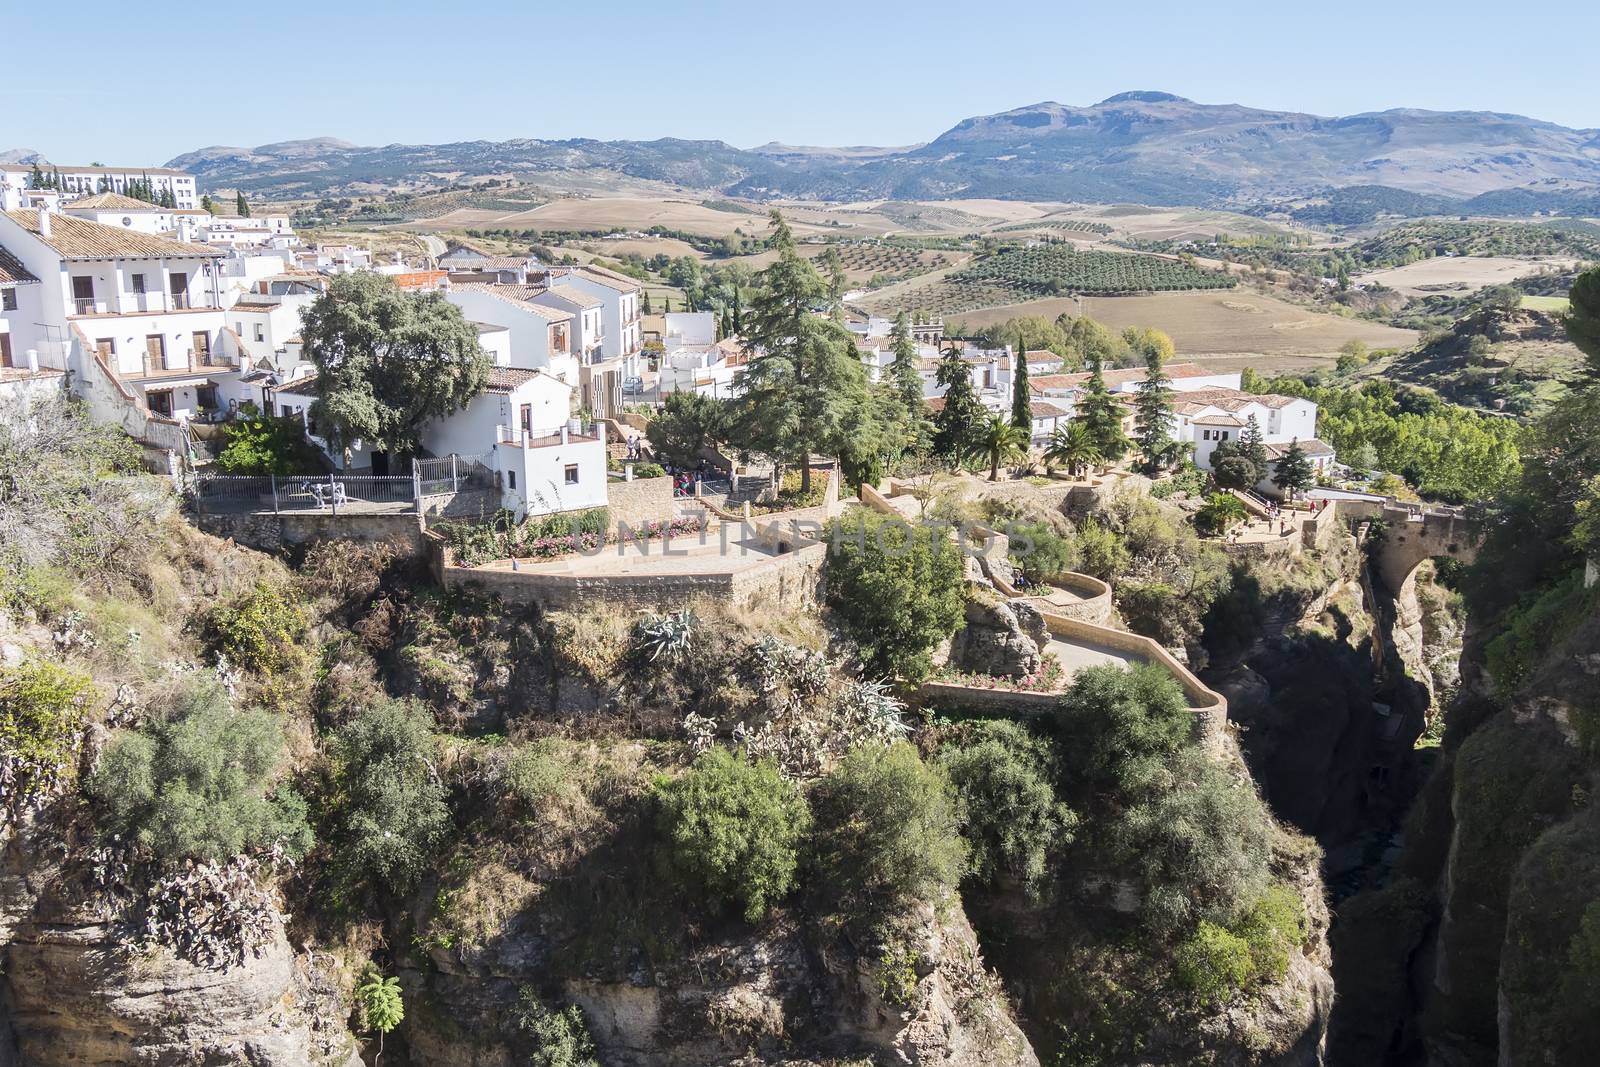 View from the new Bridge over Guadalevin River in Ronda, Malaga, by max8xam